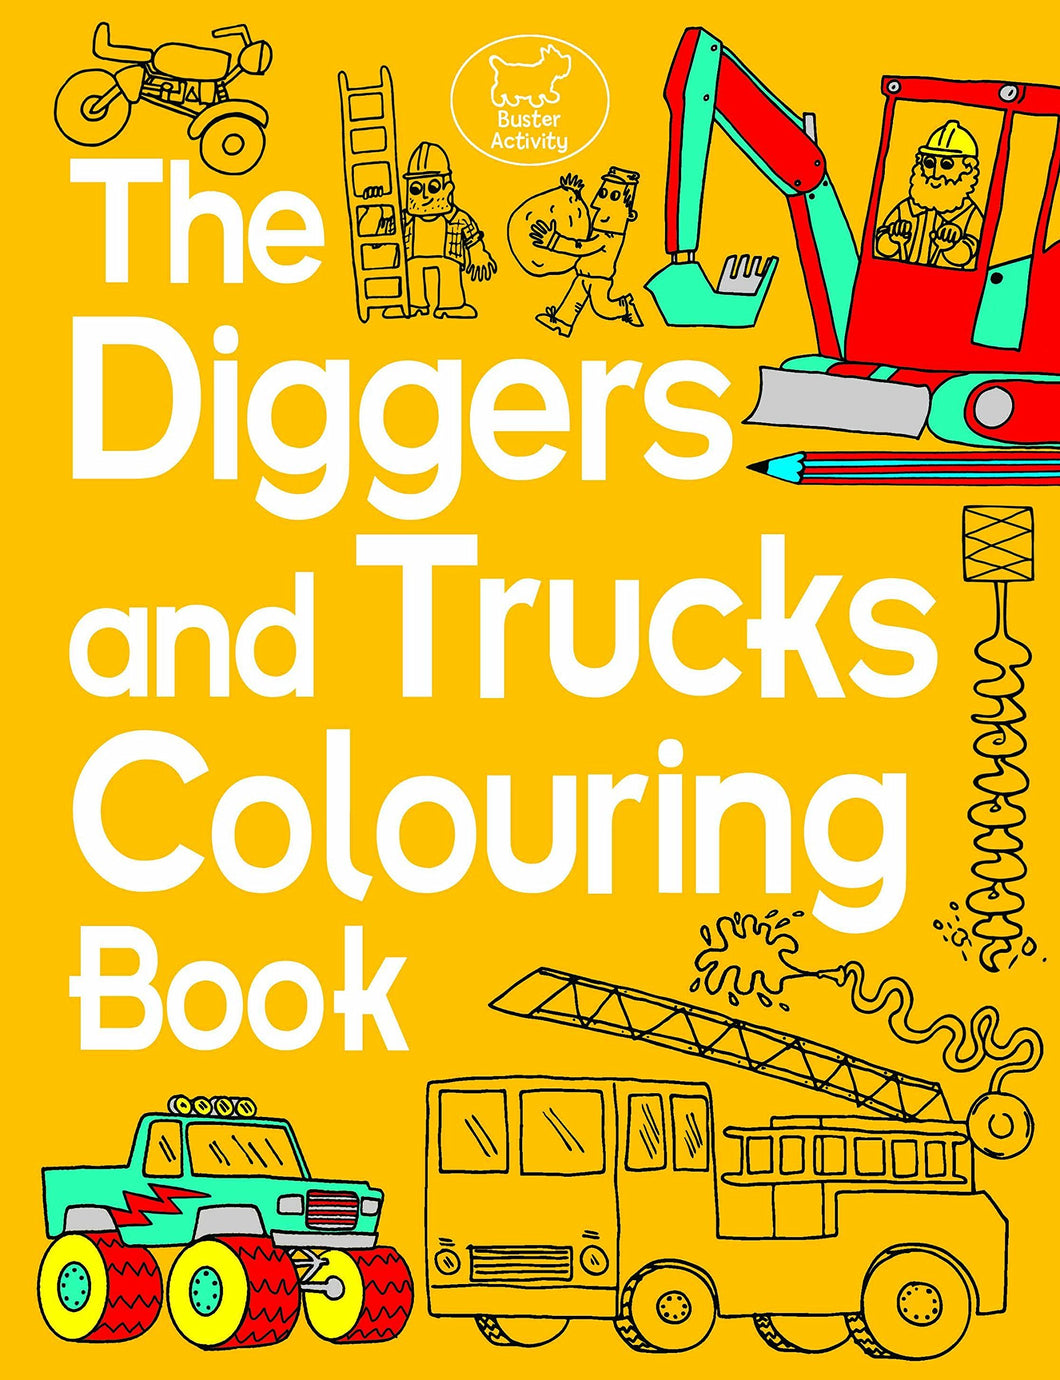 Diggers and Trucks Colouring Book - ONLINE SCHOOL BOOK FAIRS 